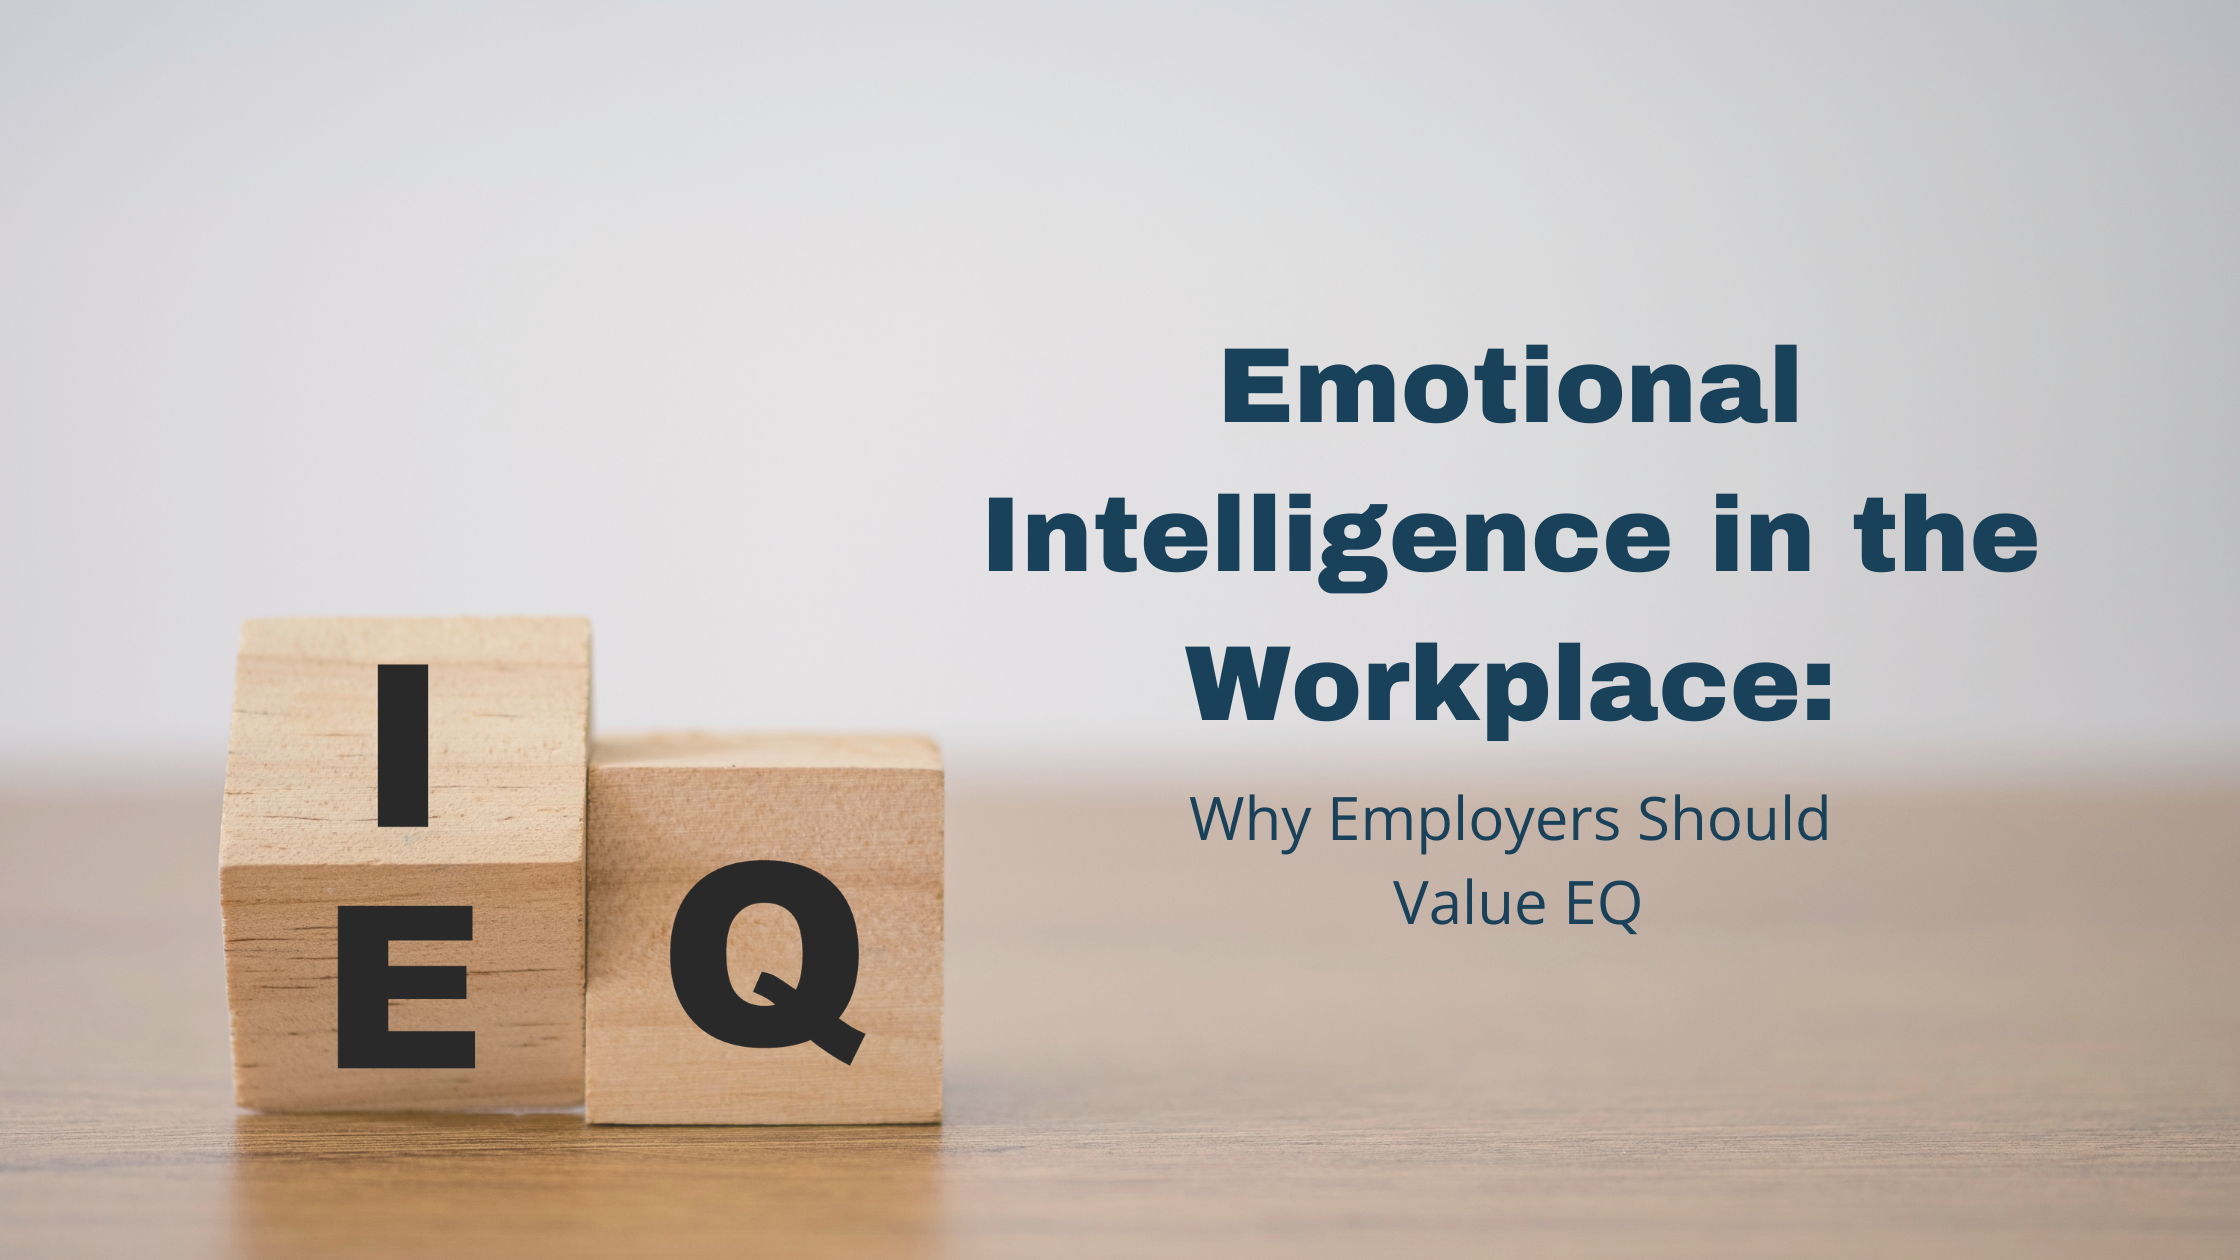 Emotional Intelligence in the Workplace guide